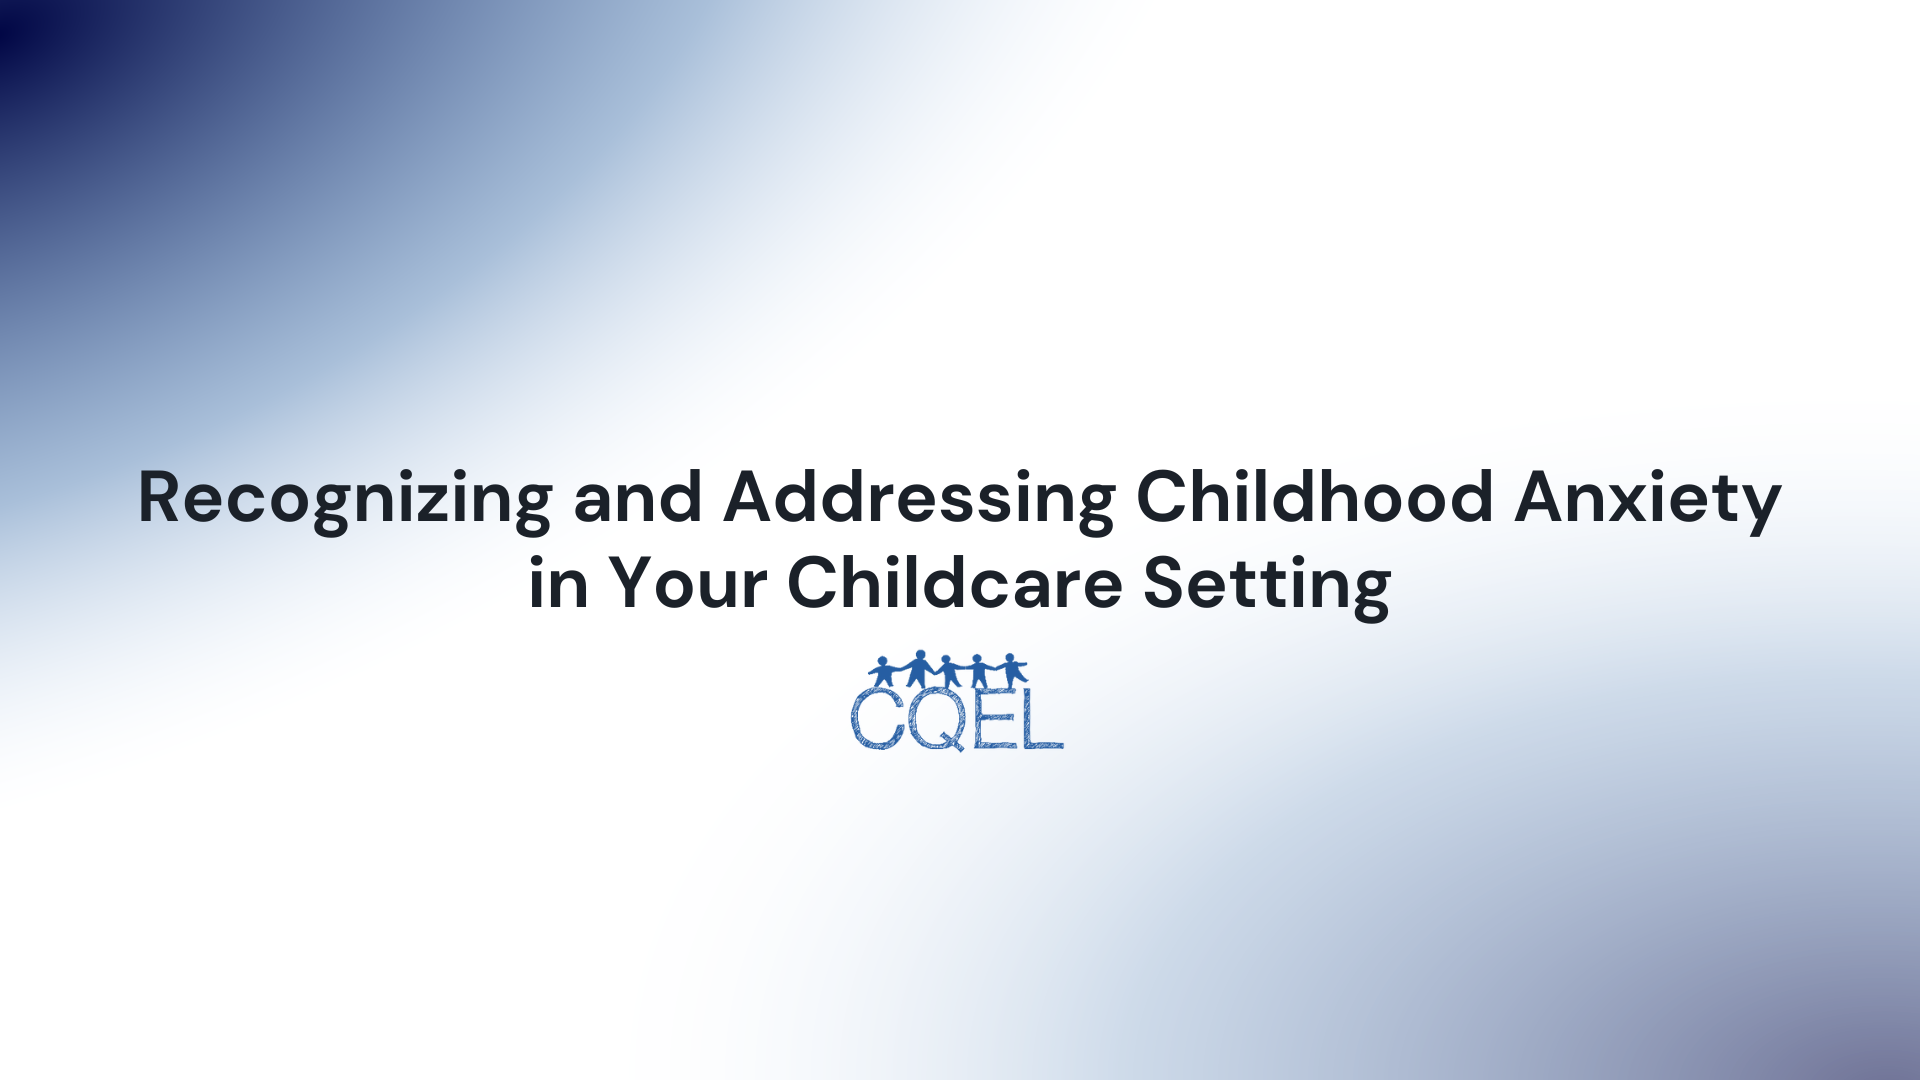 Recognizing and Addressing Childhood Anxiety in Your Childcare Setting